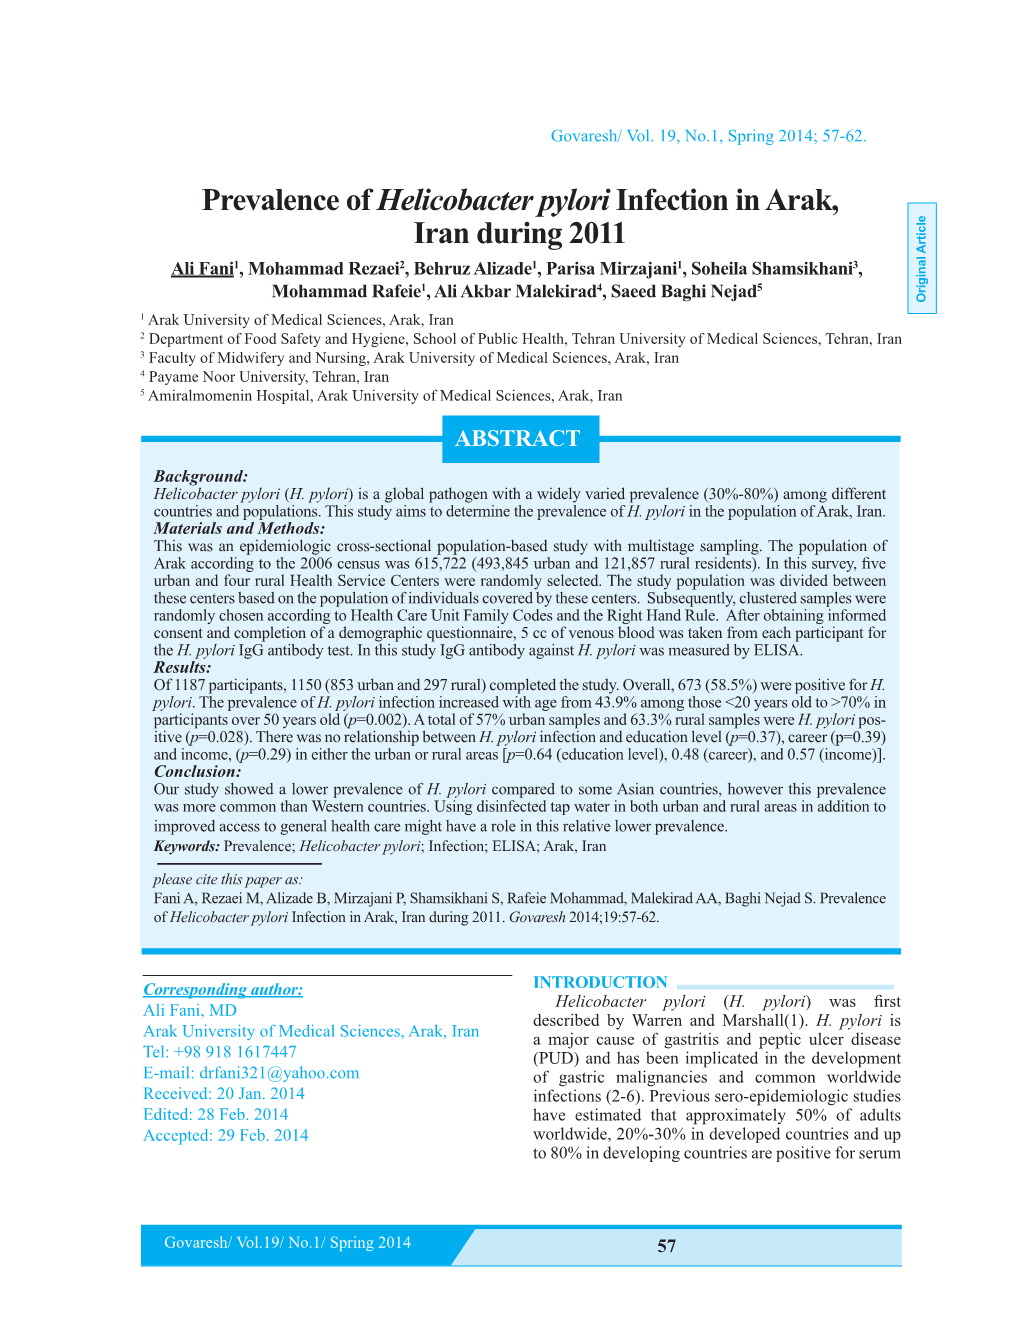 Prevalence of Helicobacter Pylori Infection in Arak, Iran During 2011